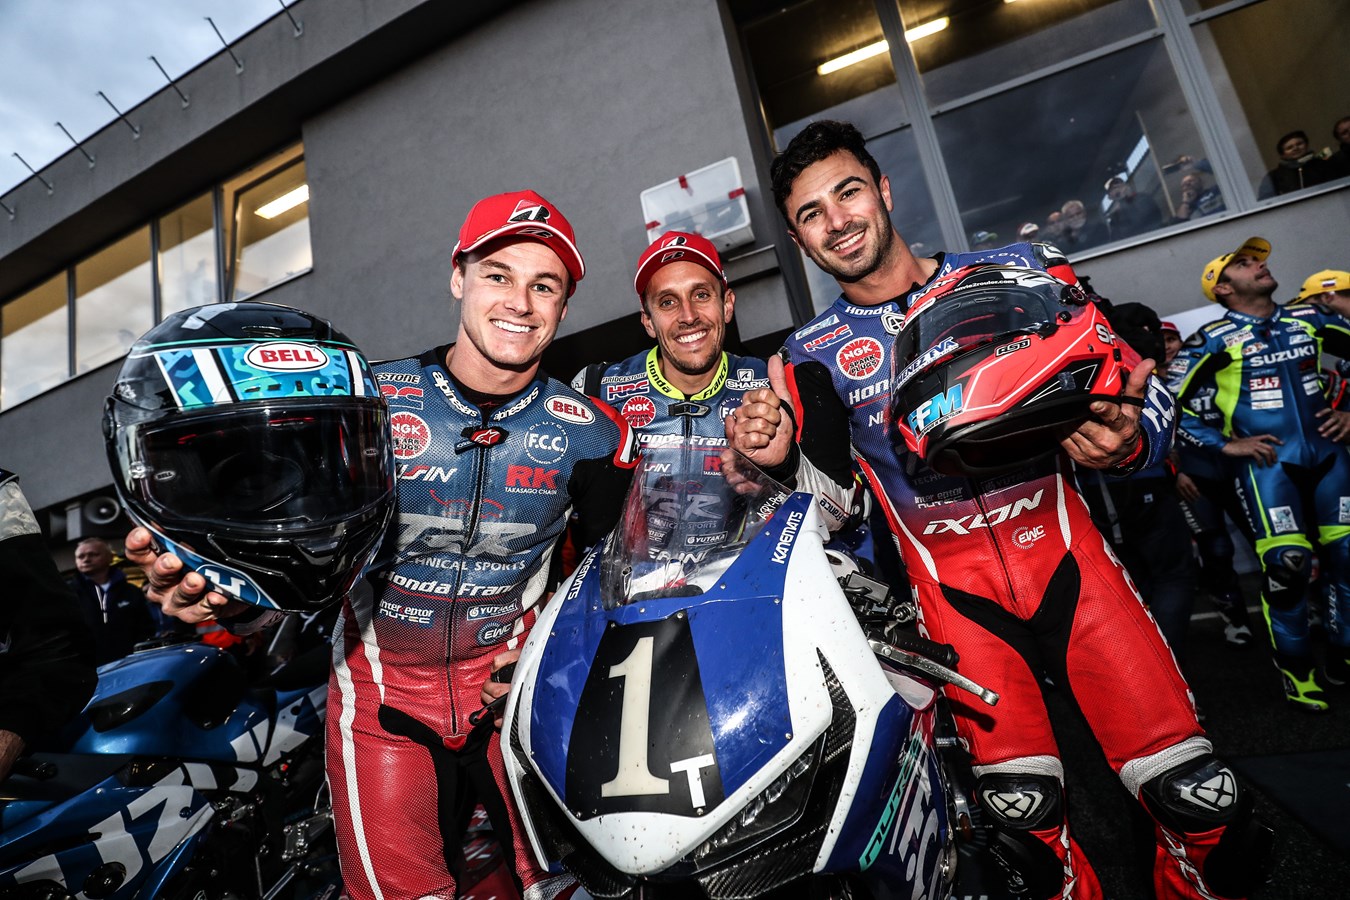 F.C.C. TSR Honda France fights to a heroic podium at the 8 Hours of Slovakia Ring